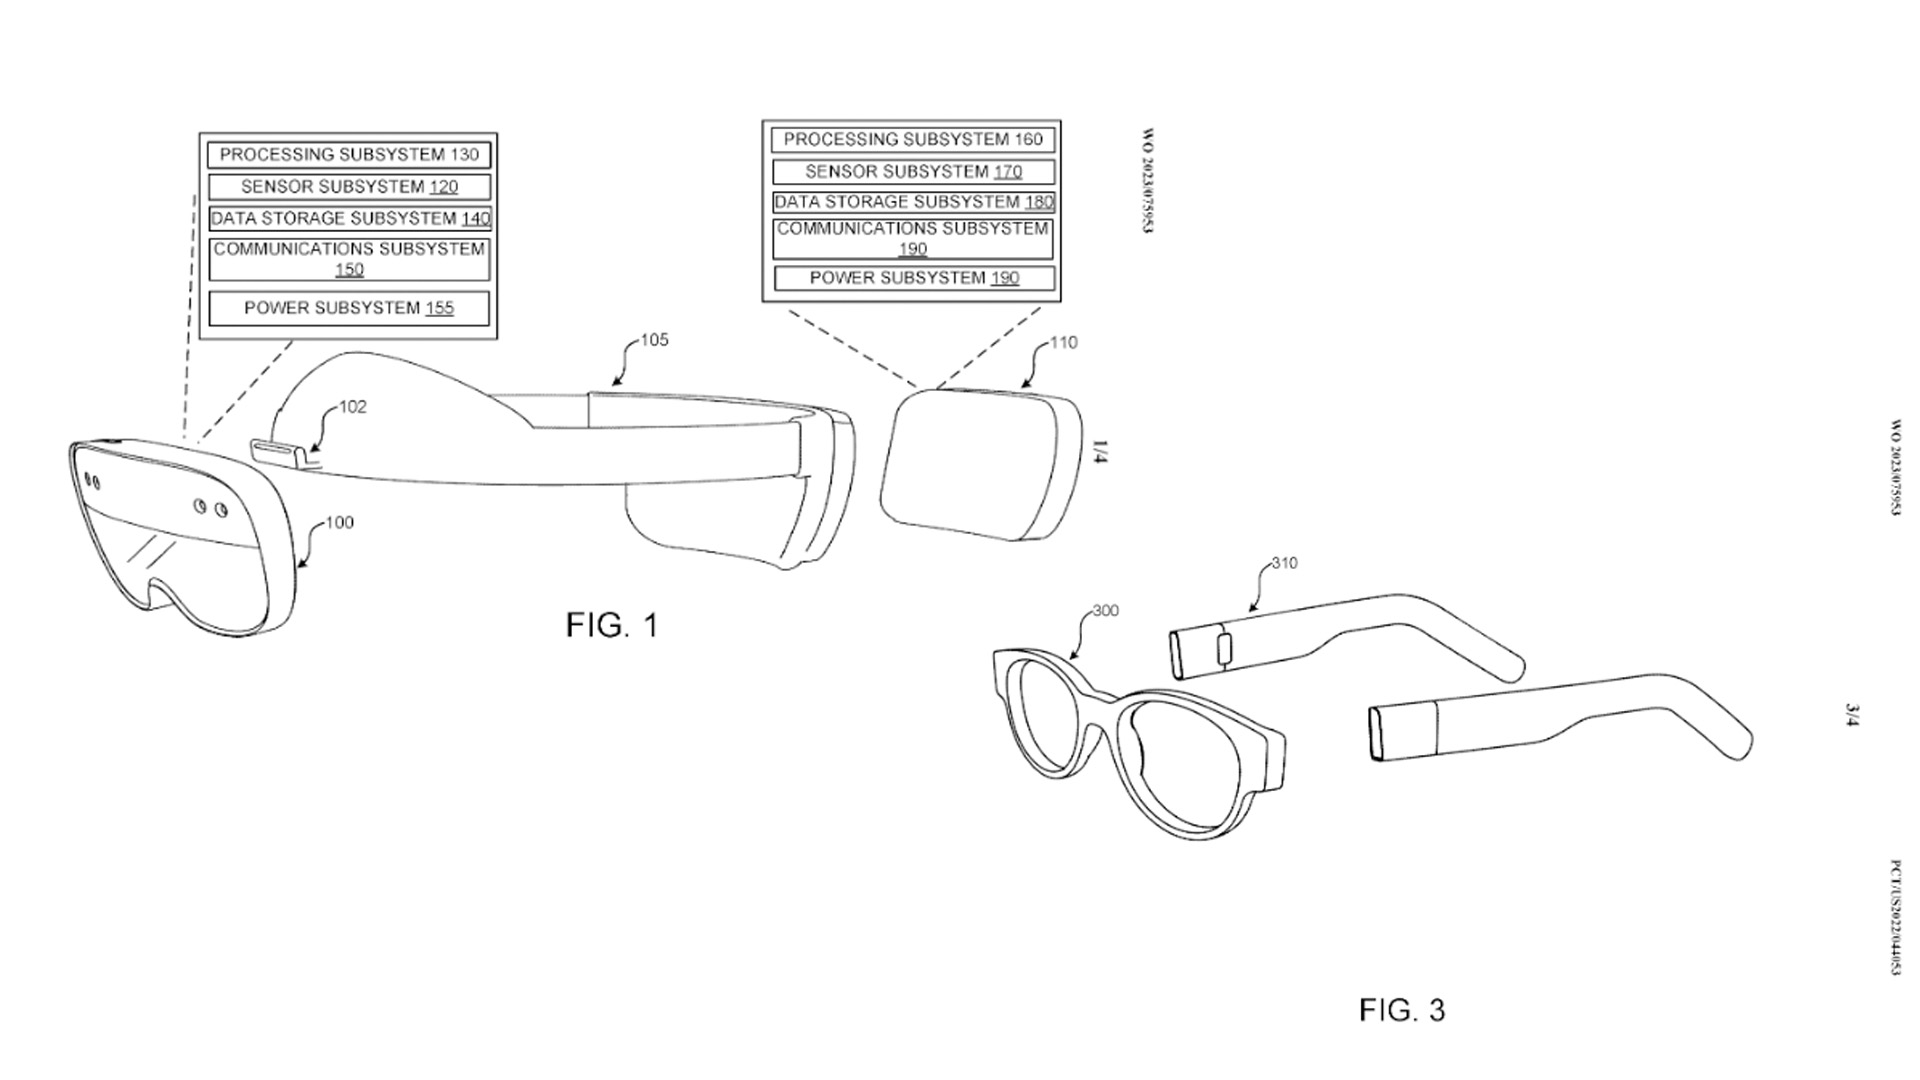 hololens-3?-microsoft-has-patented-a-new-modular-hmd-that-could-be-more-affordable